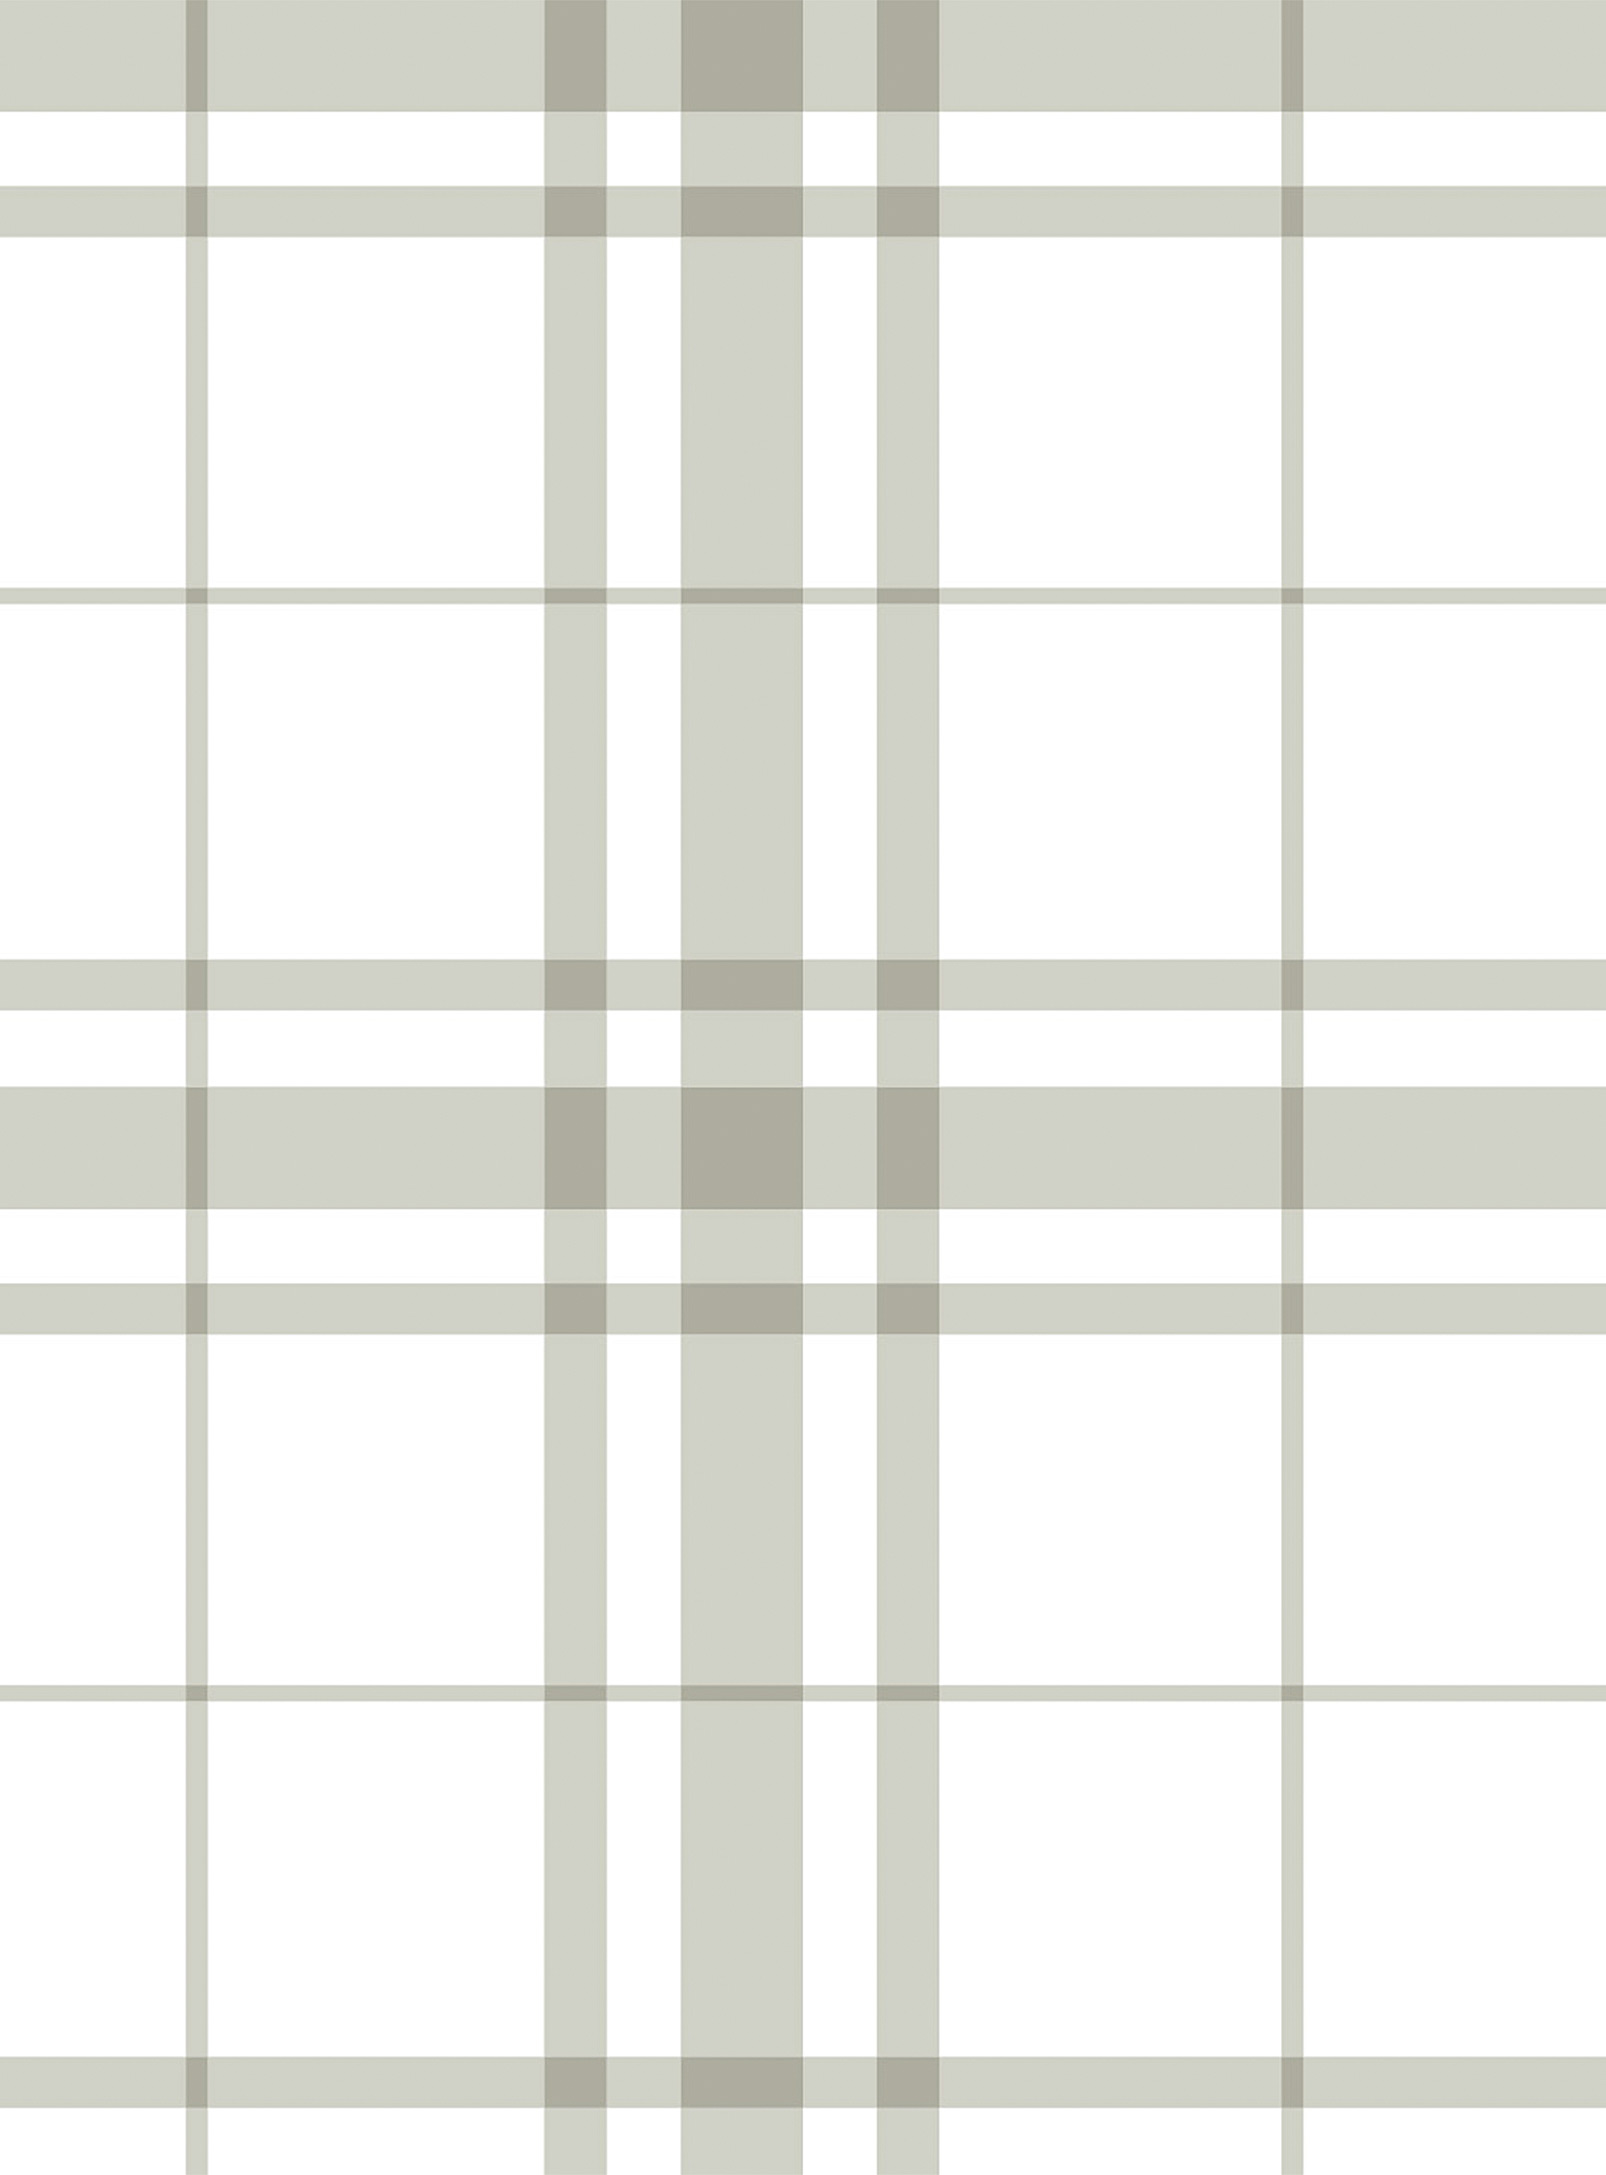 Station D Jacob Checkered Wallpaper Strip See Available Sizes In Khaki